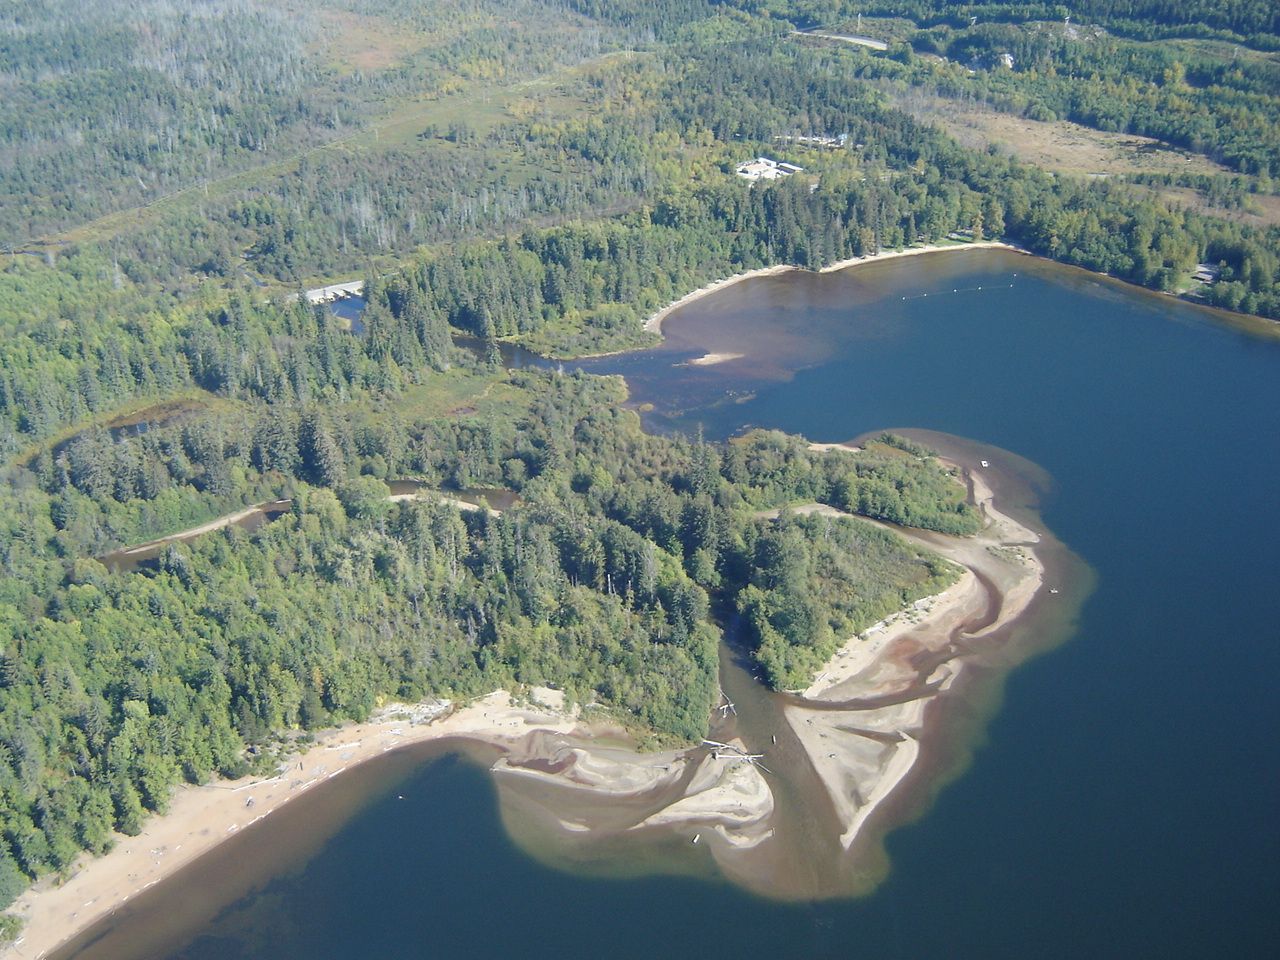 Aerial view of sandy alluvial fans and beaches. Gruchy's Beach, Lakelse Lake Park.